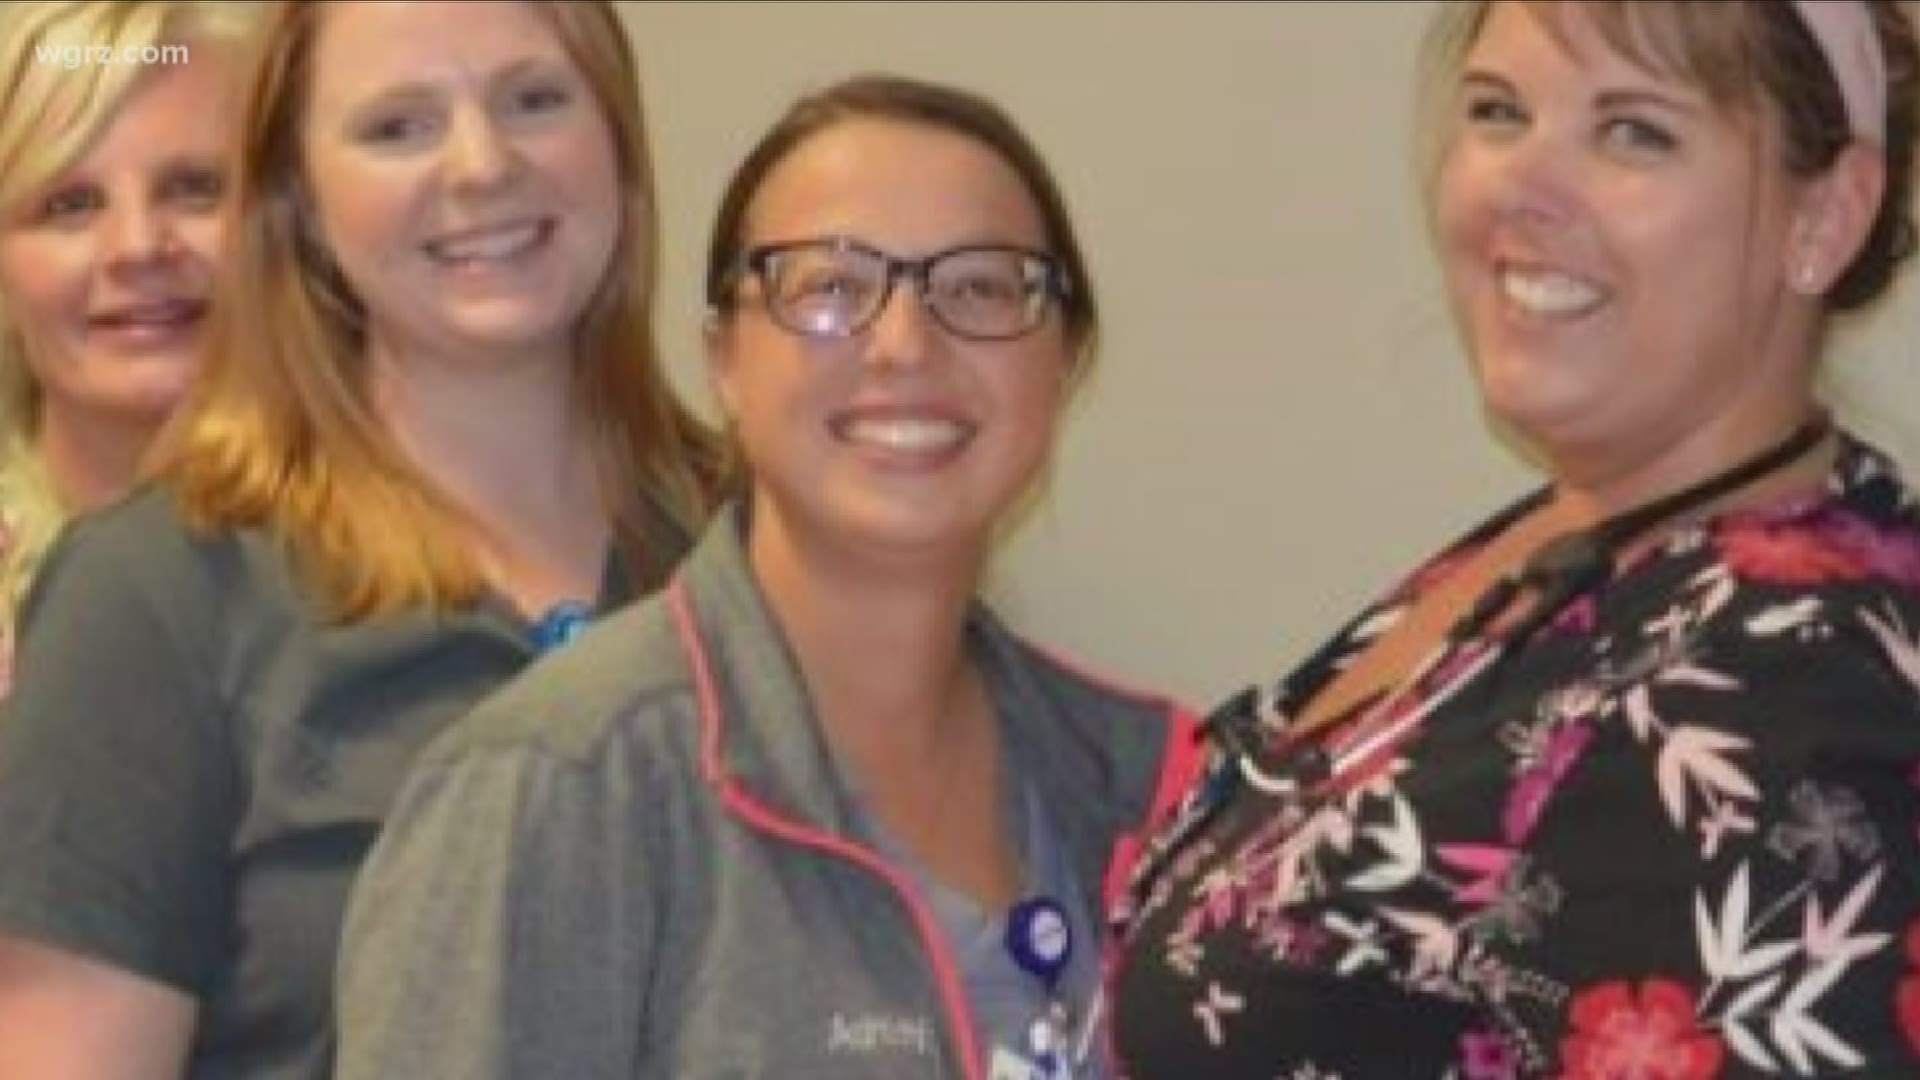 A nurses aide at Sisters Hospital who dedicates her life to helping others, now needs help because of kidney failure. Her nursing family made a mission to help her.